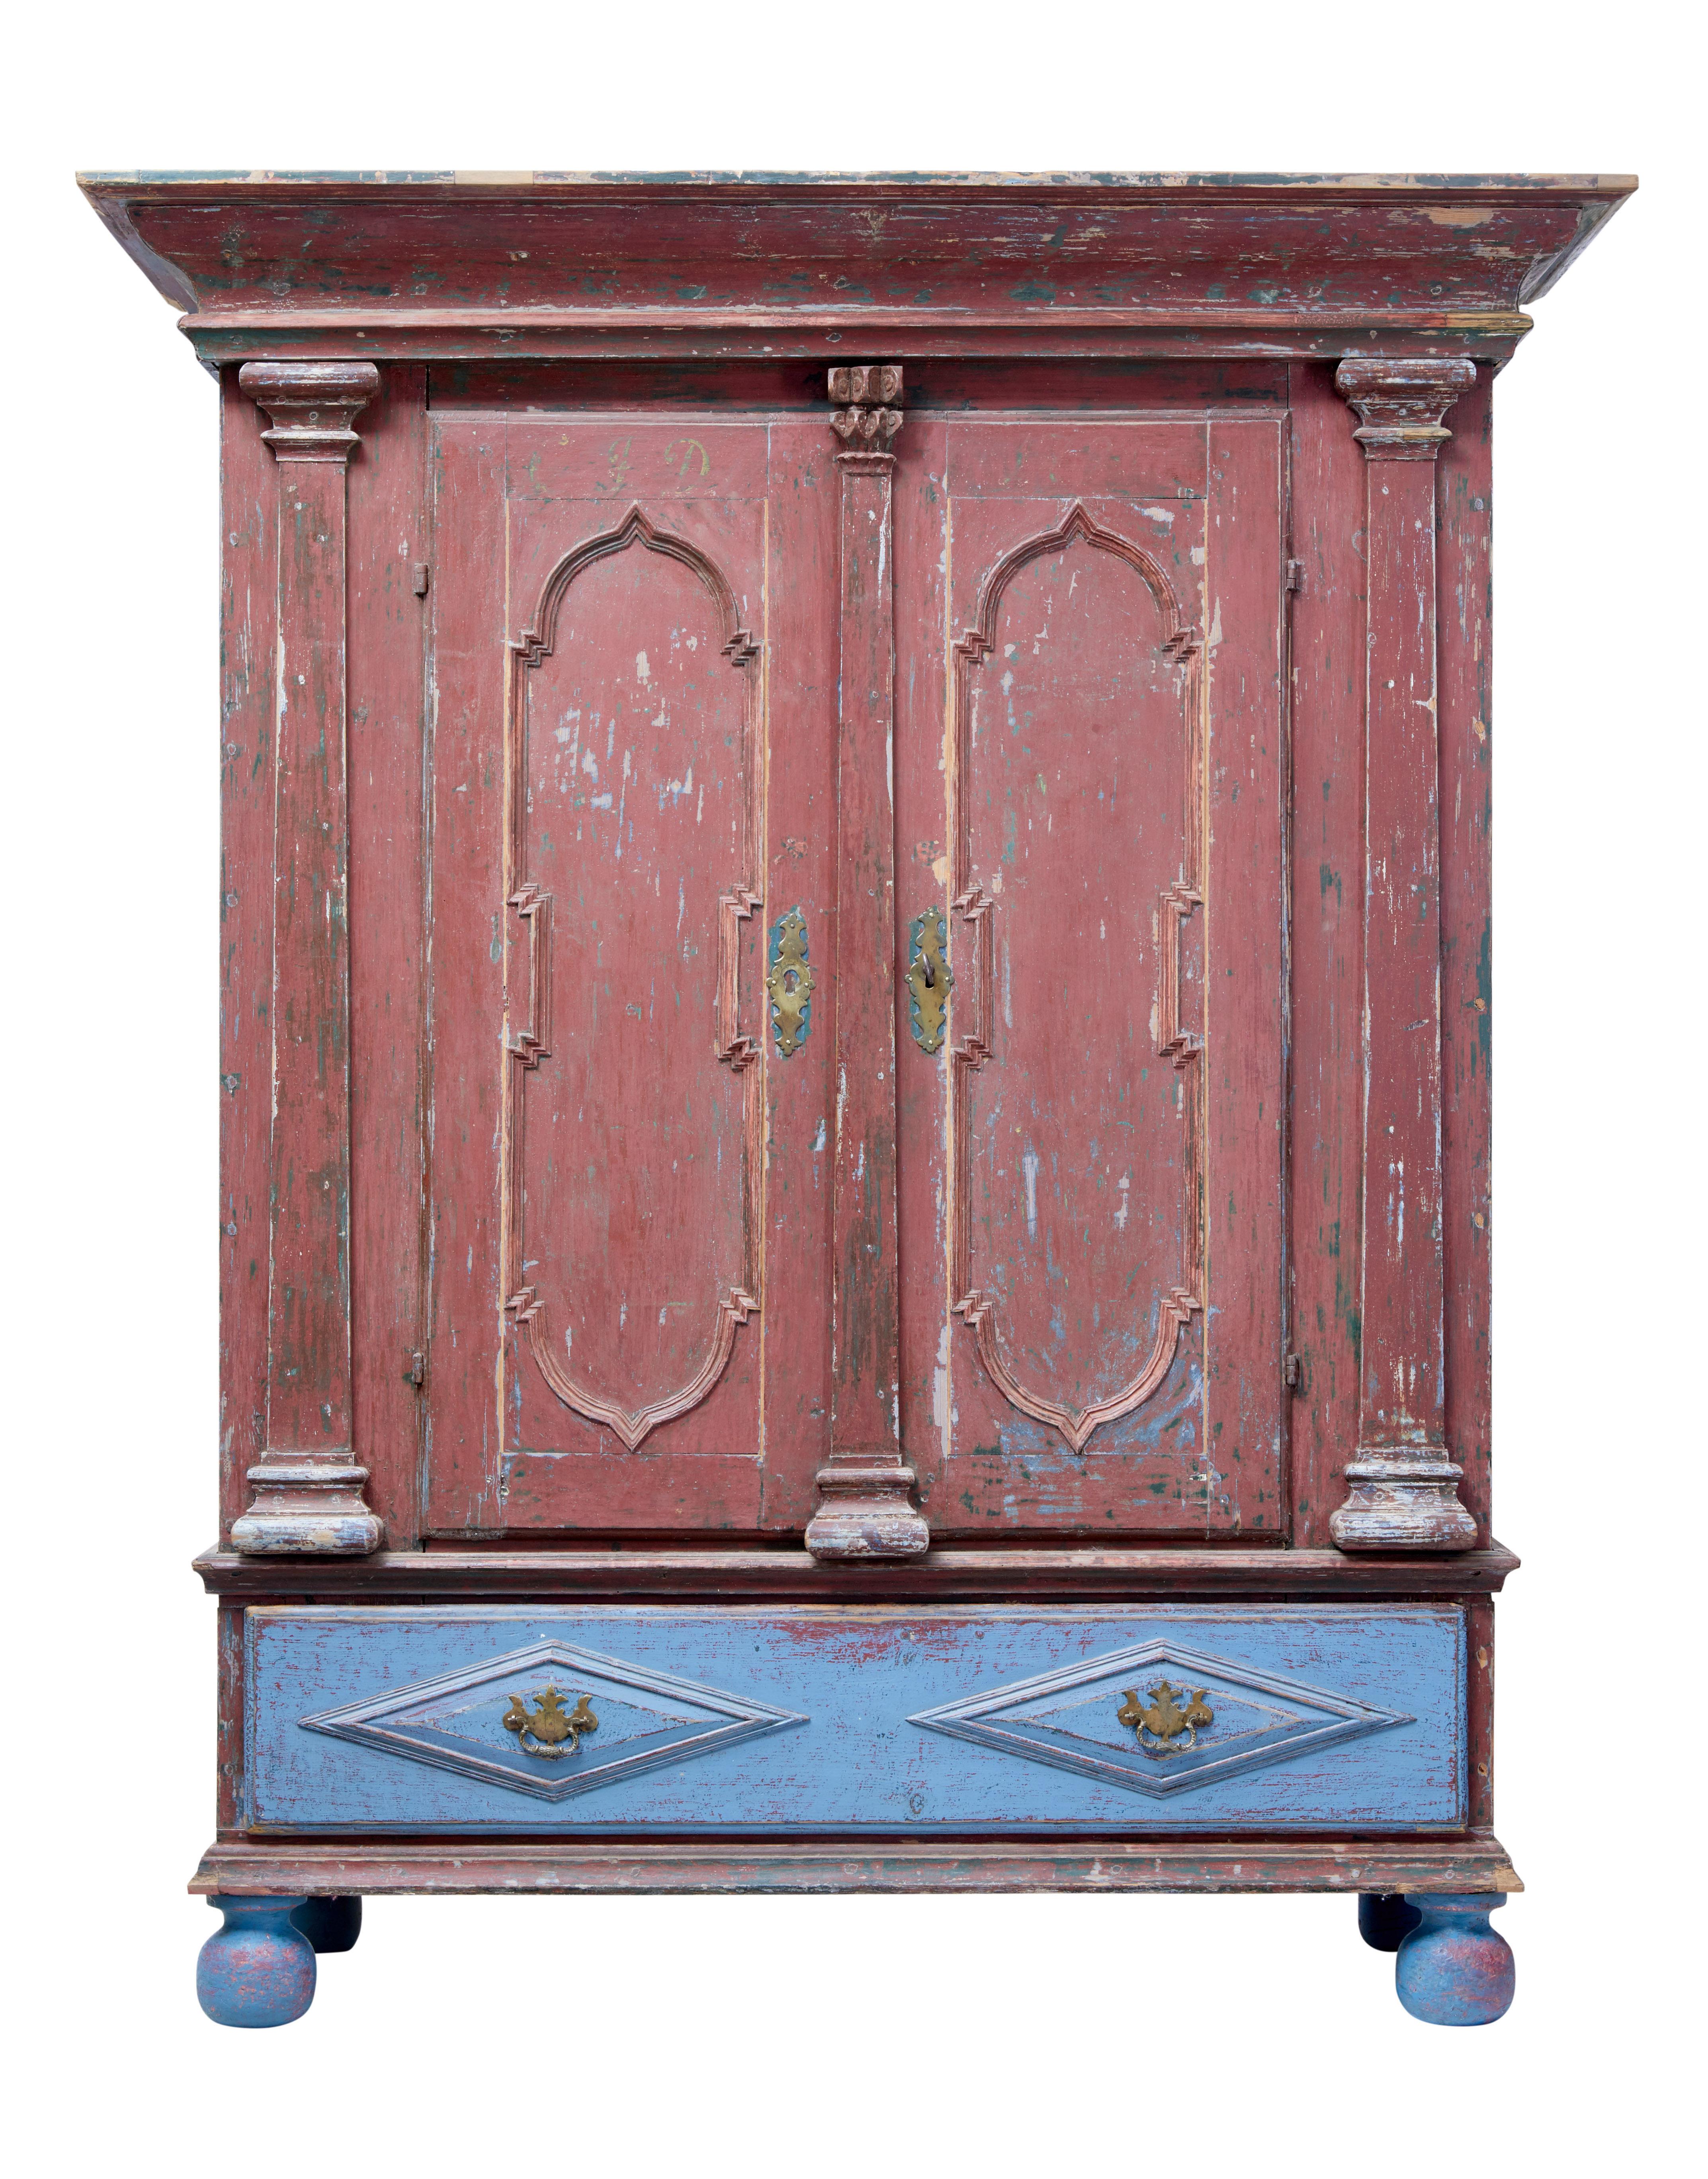 Substantial rustic Swedish baroque influenced cabinet, circa 1799.

Dated from very faded initials and date to the top of the doors and presented in its original scraped back paint.

Large over sailing cornice, below which a double door cupboard